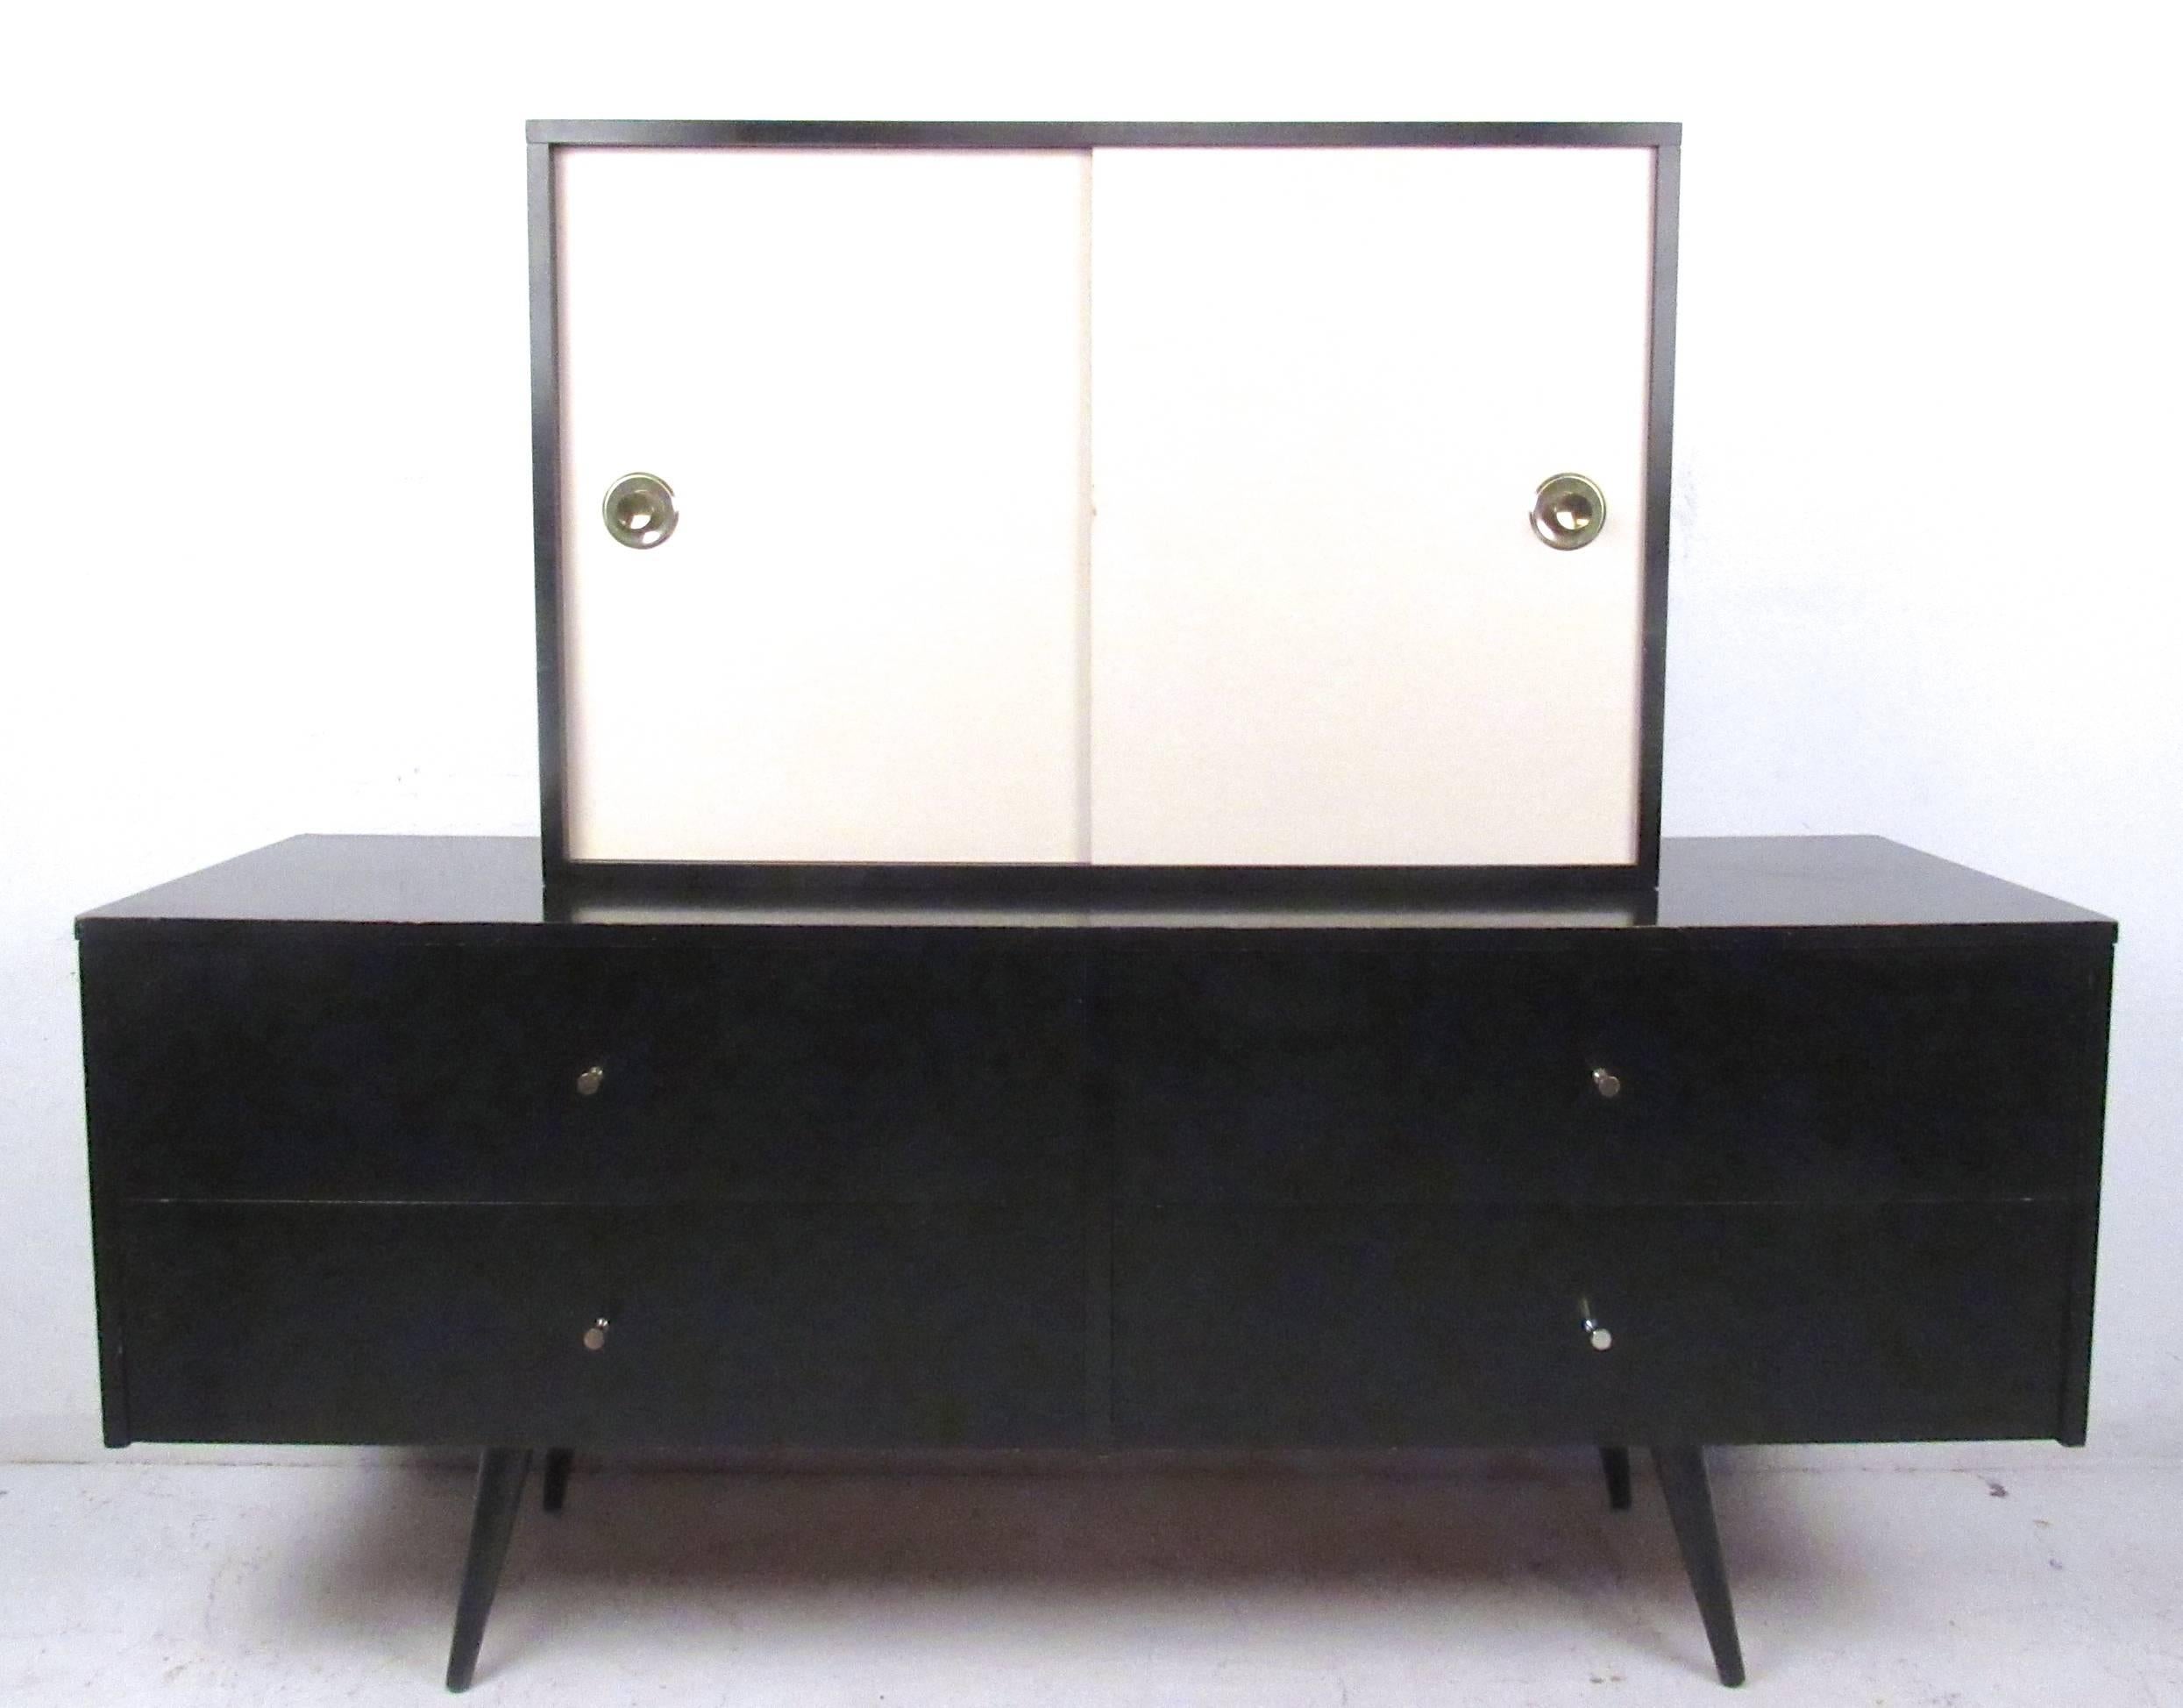 This unique two-piece credenza by Paul McCobb features four drawers for storage and a sliding door cabinet topper. Classic Paul McCobb design is evident with unique pulls, tapered legs, and clean lines (original label intact). Please confirm item